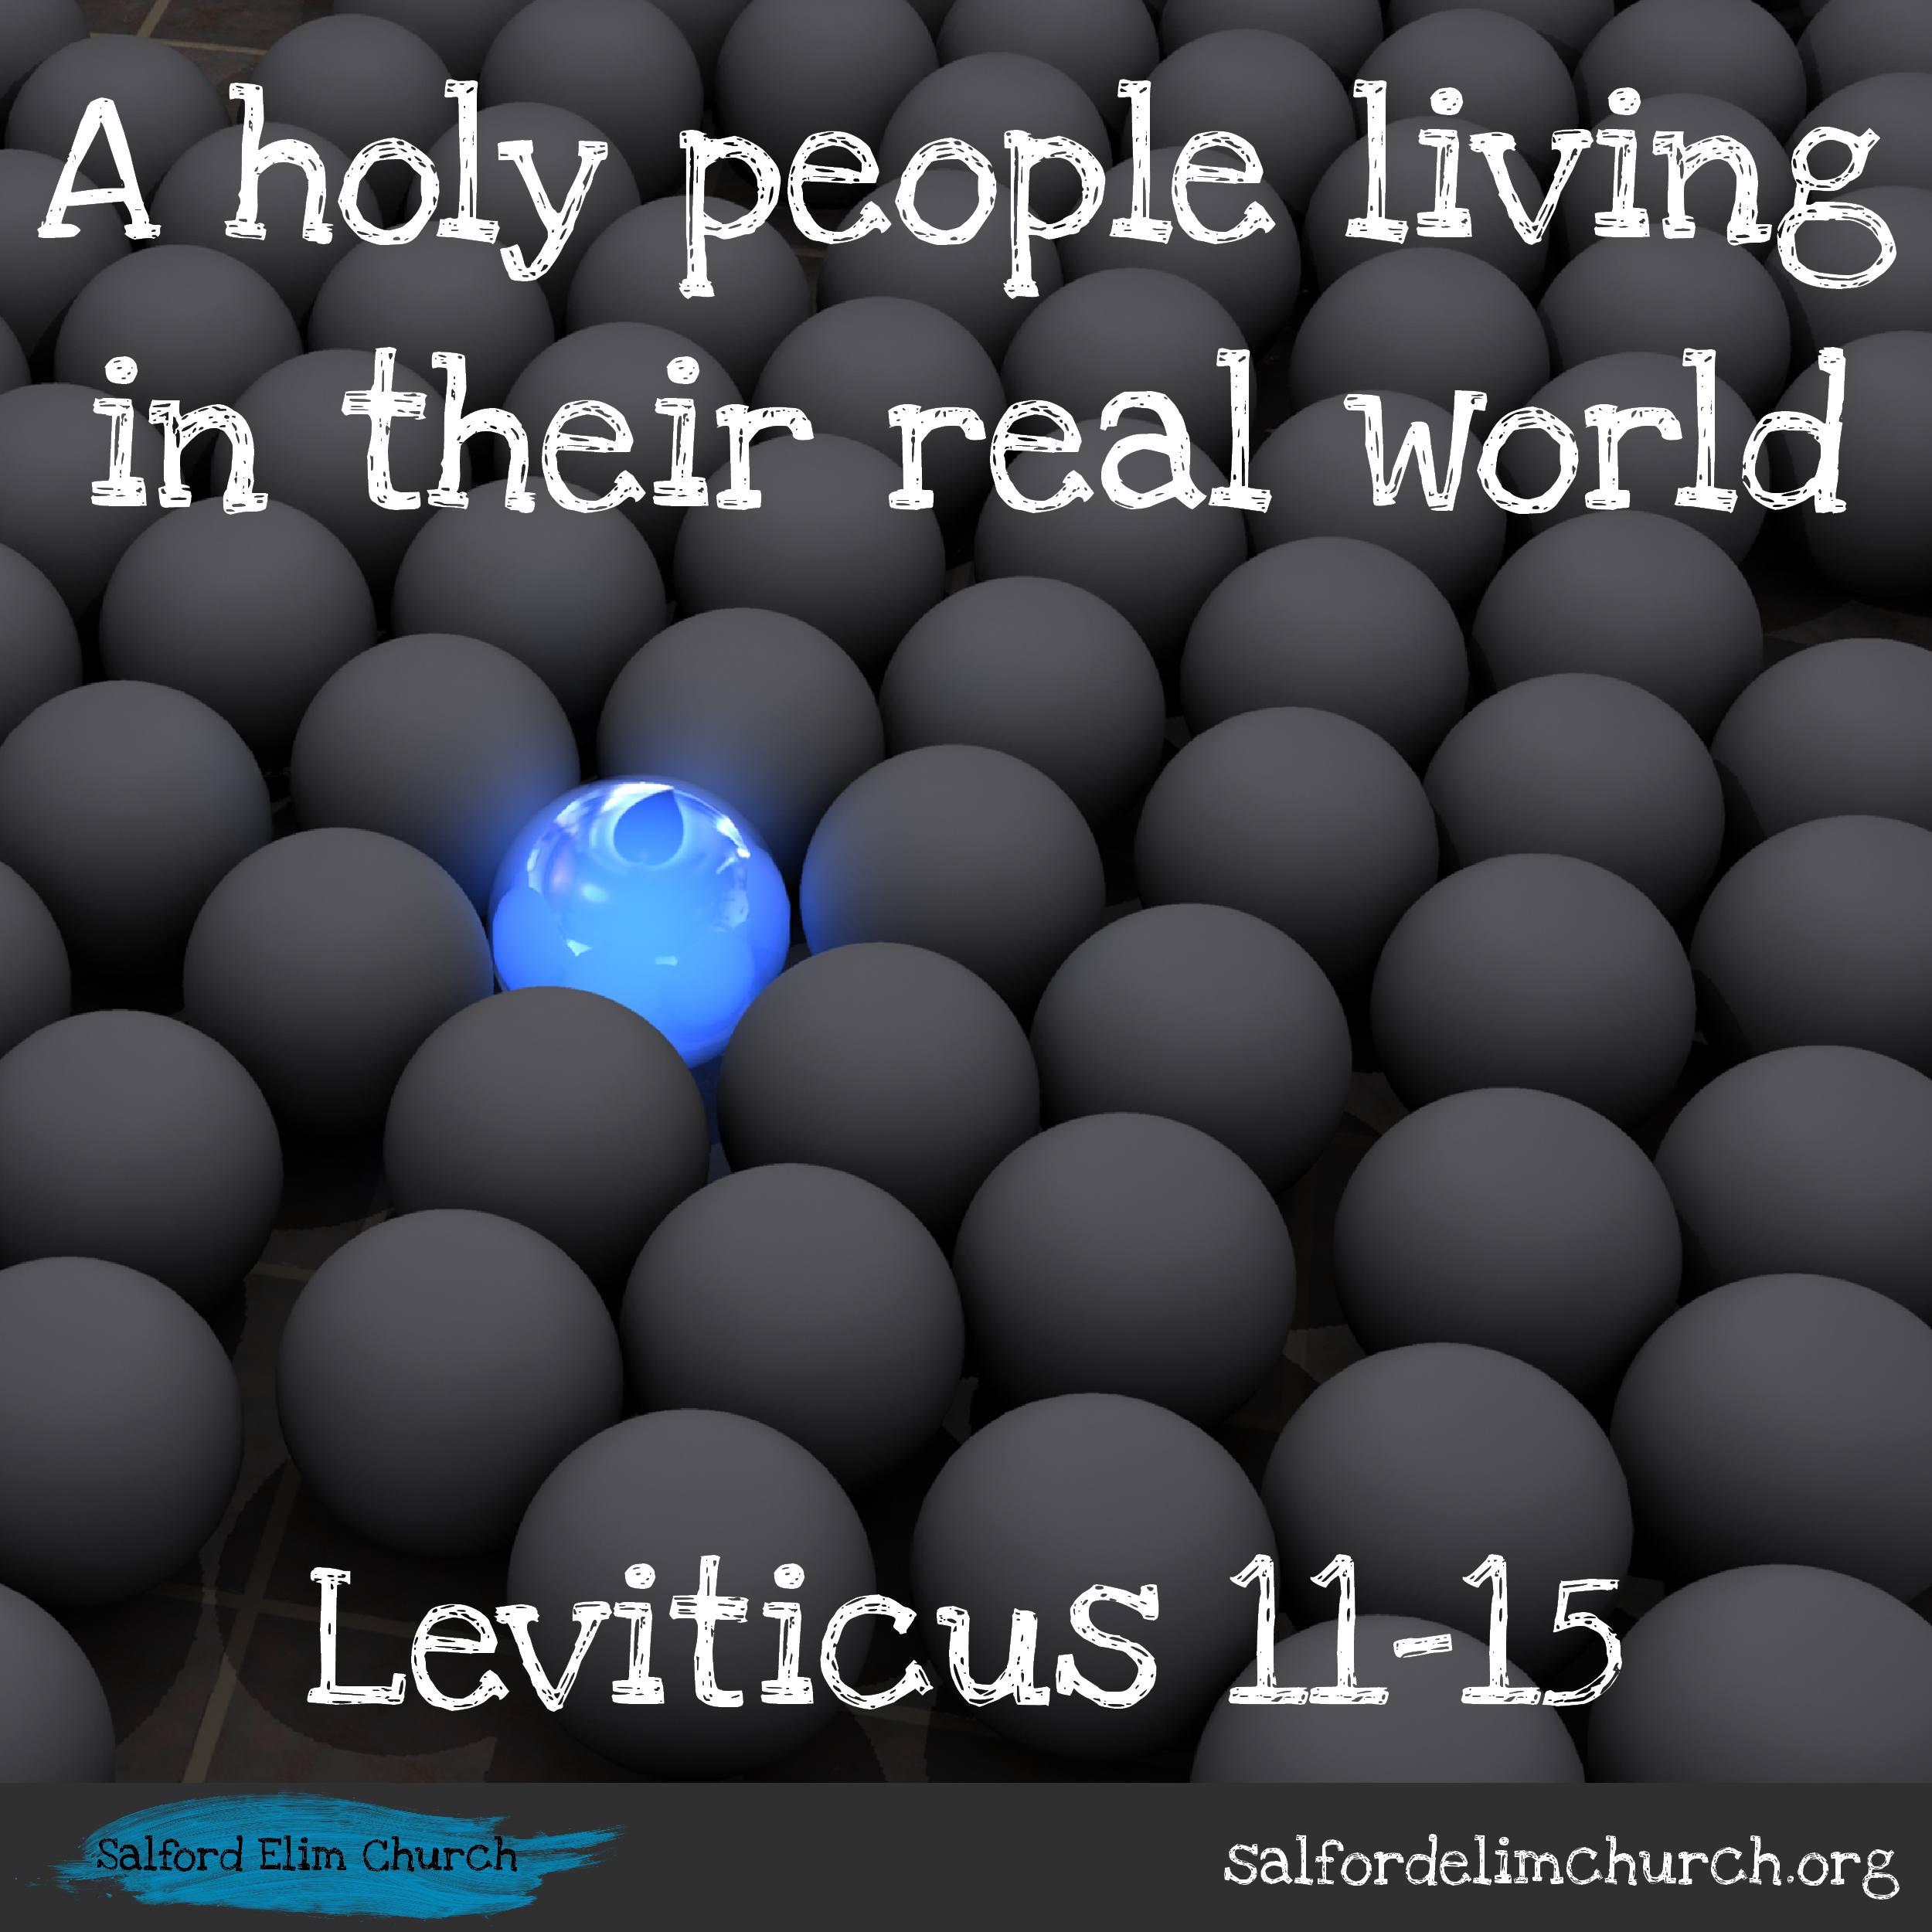 Leviticus 11-15 | A holy people living in their real world